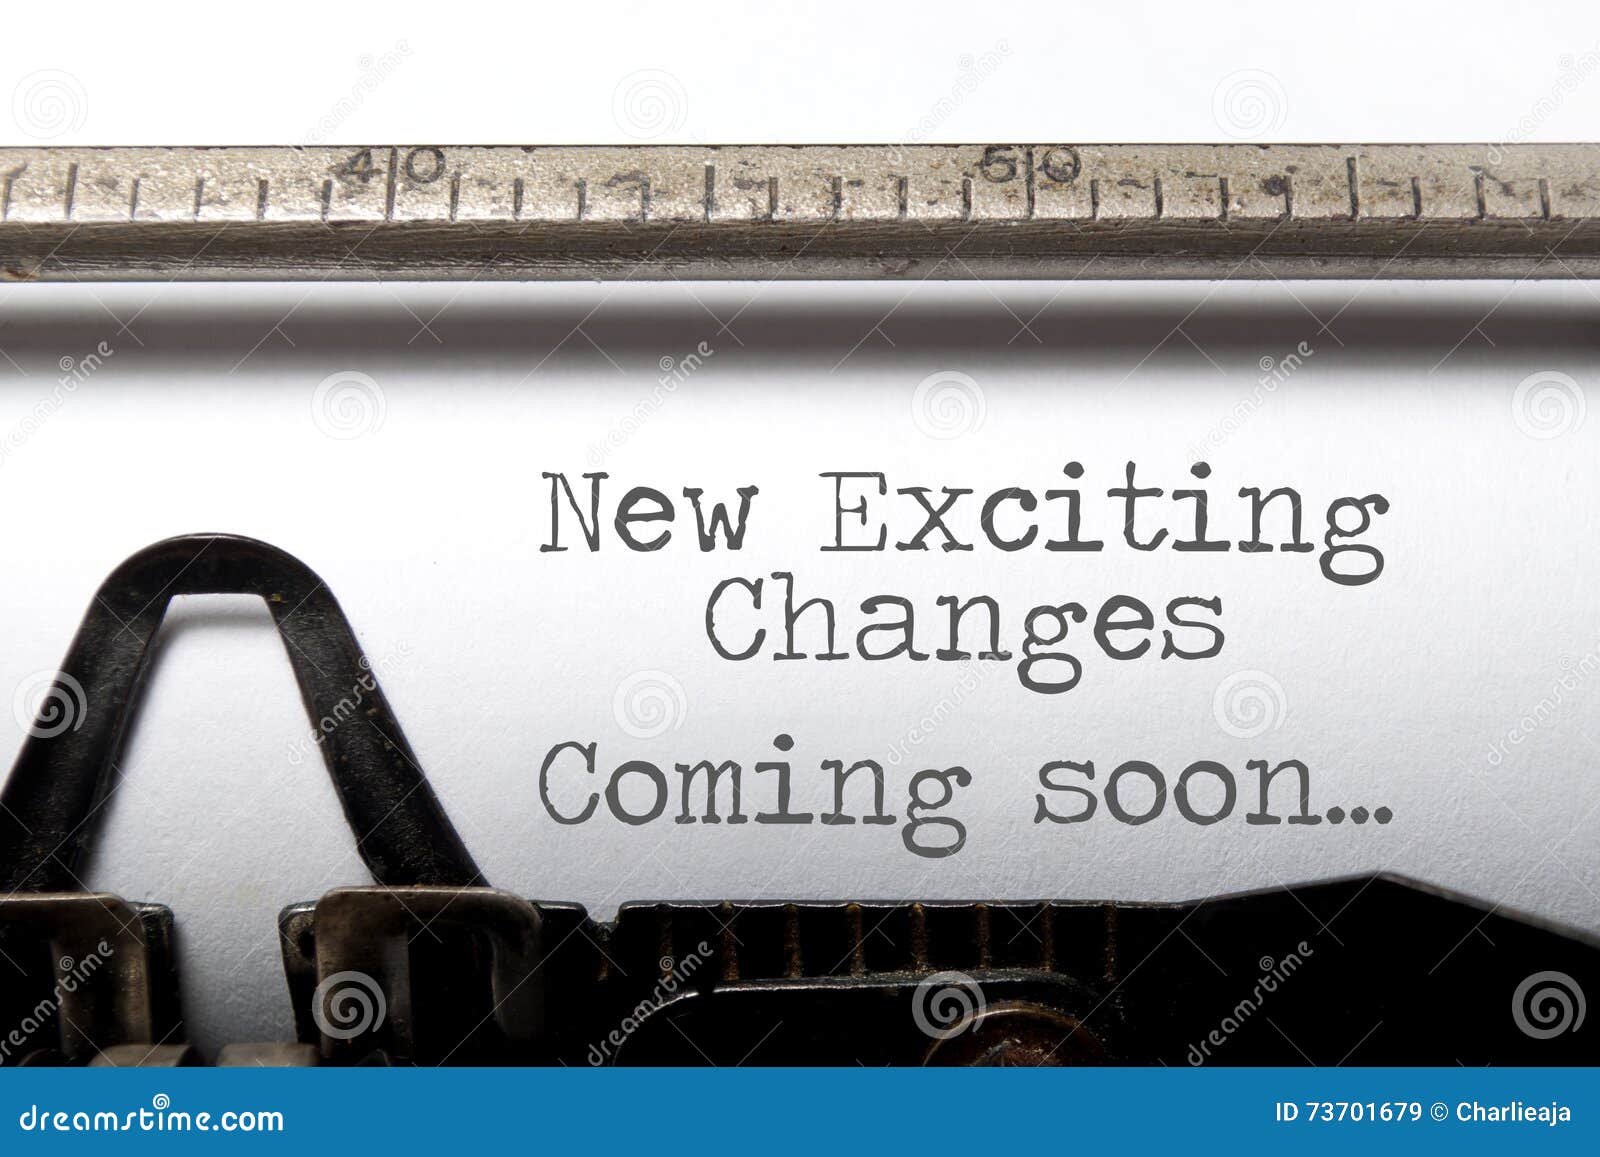 exciting changes motivational saying